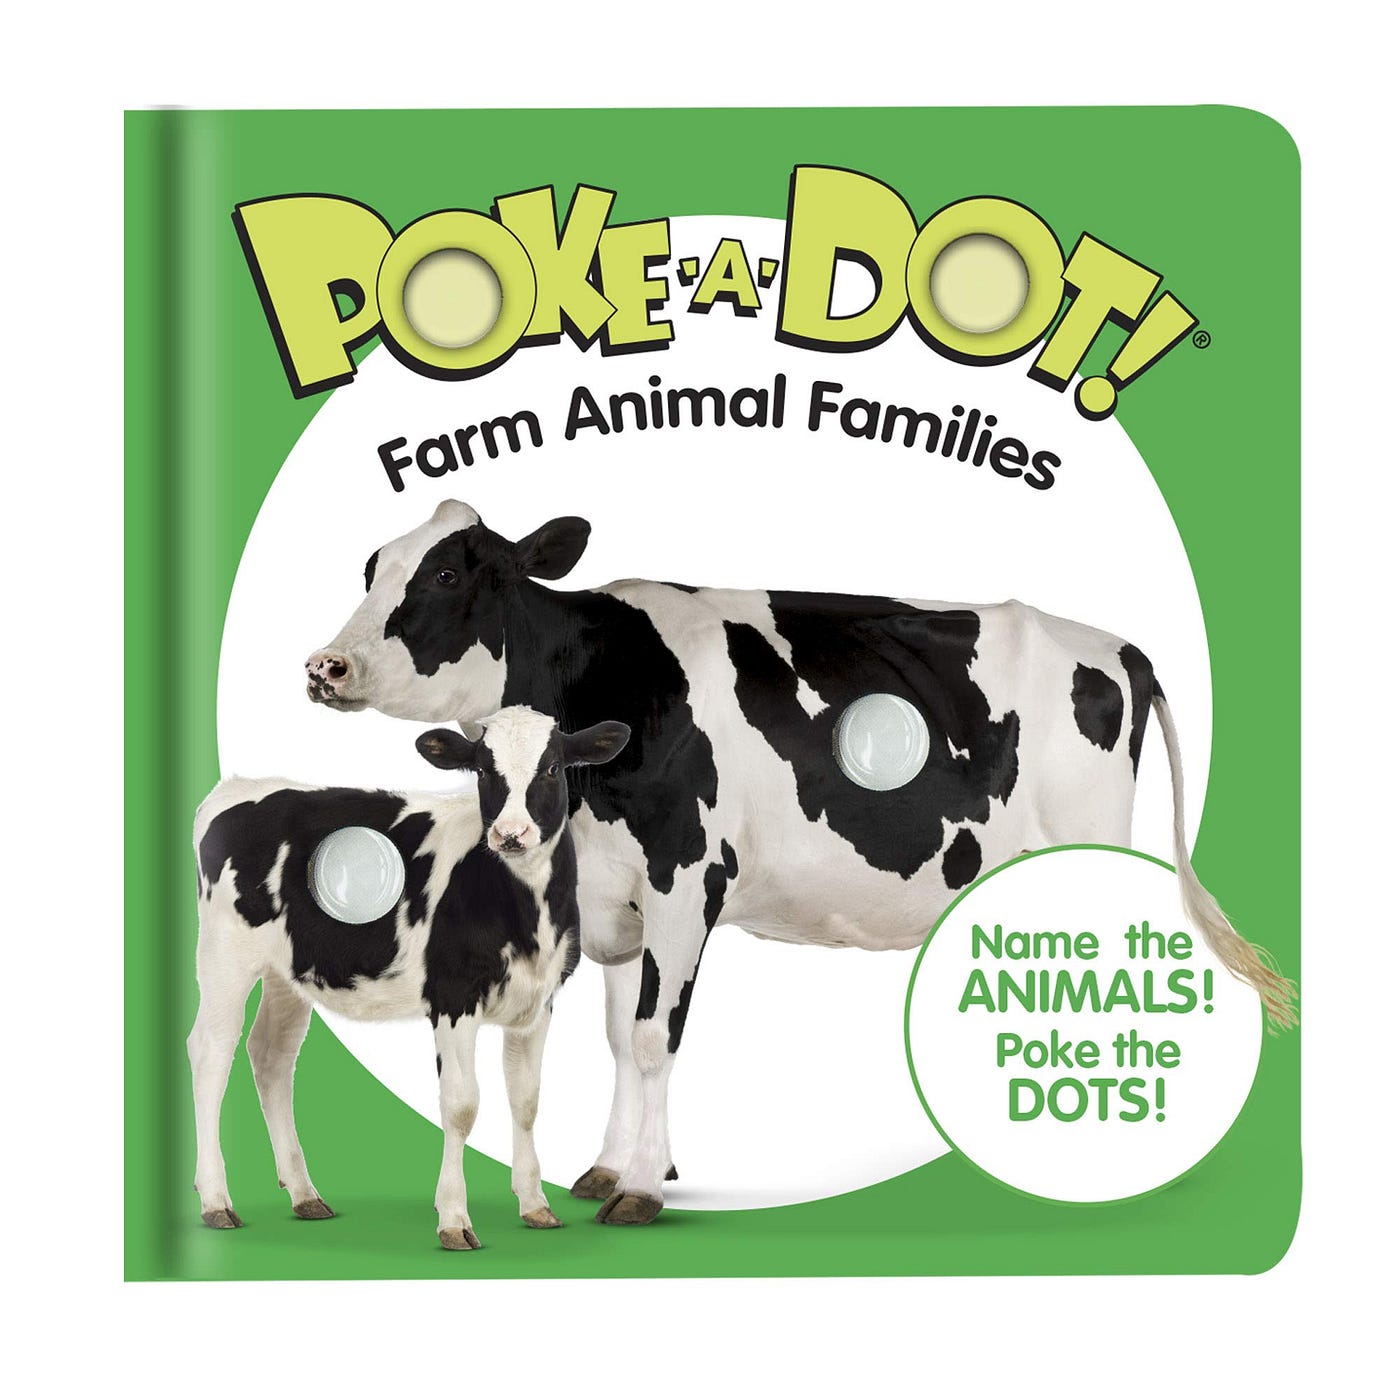 KD's Books - Do you love Poke-a-Dot books? We now have smaller